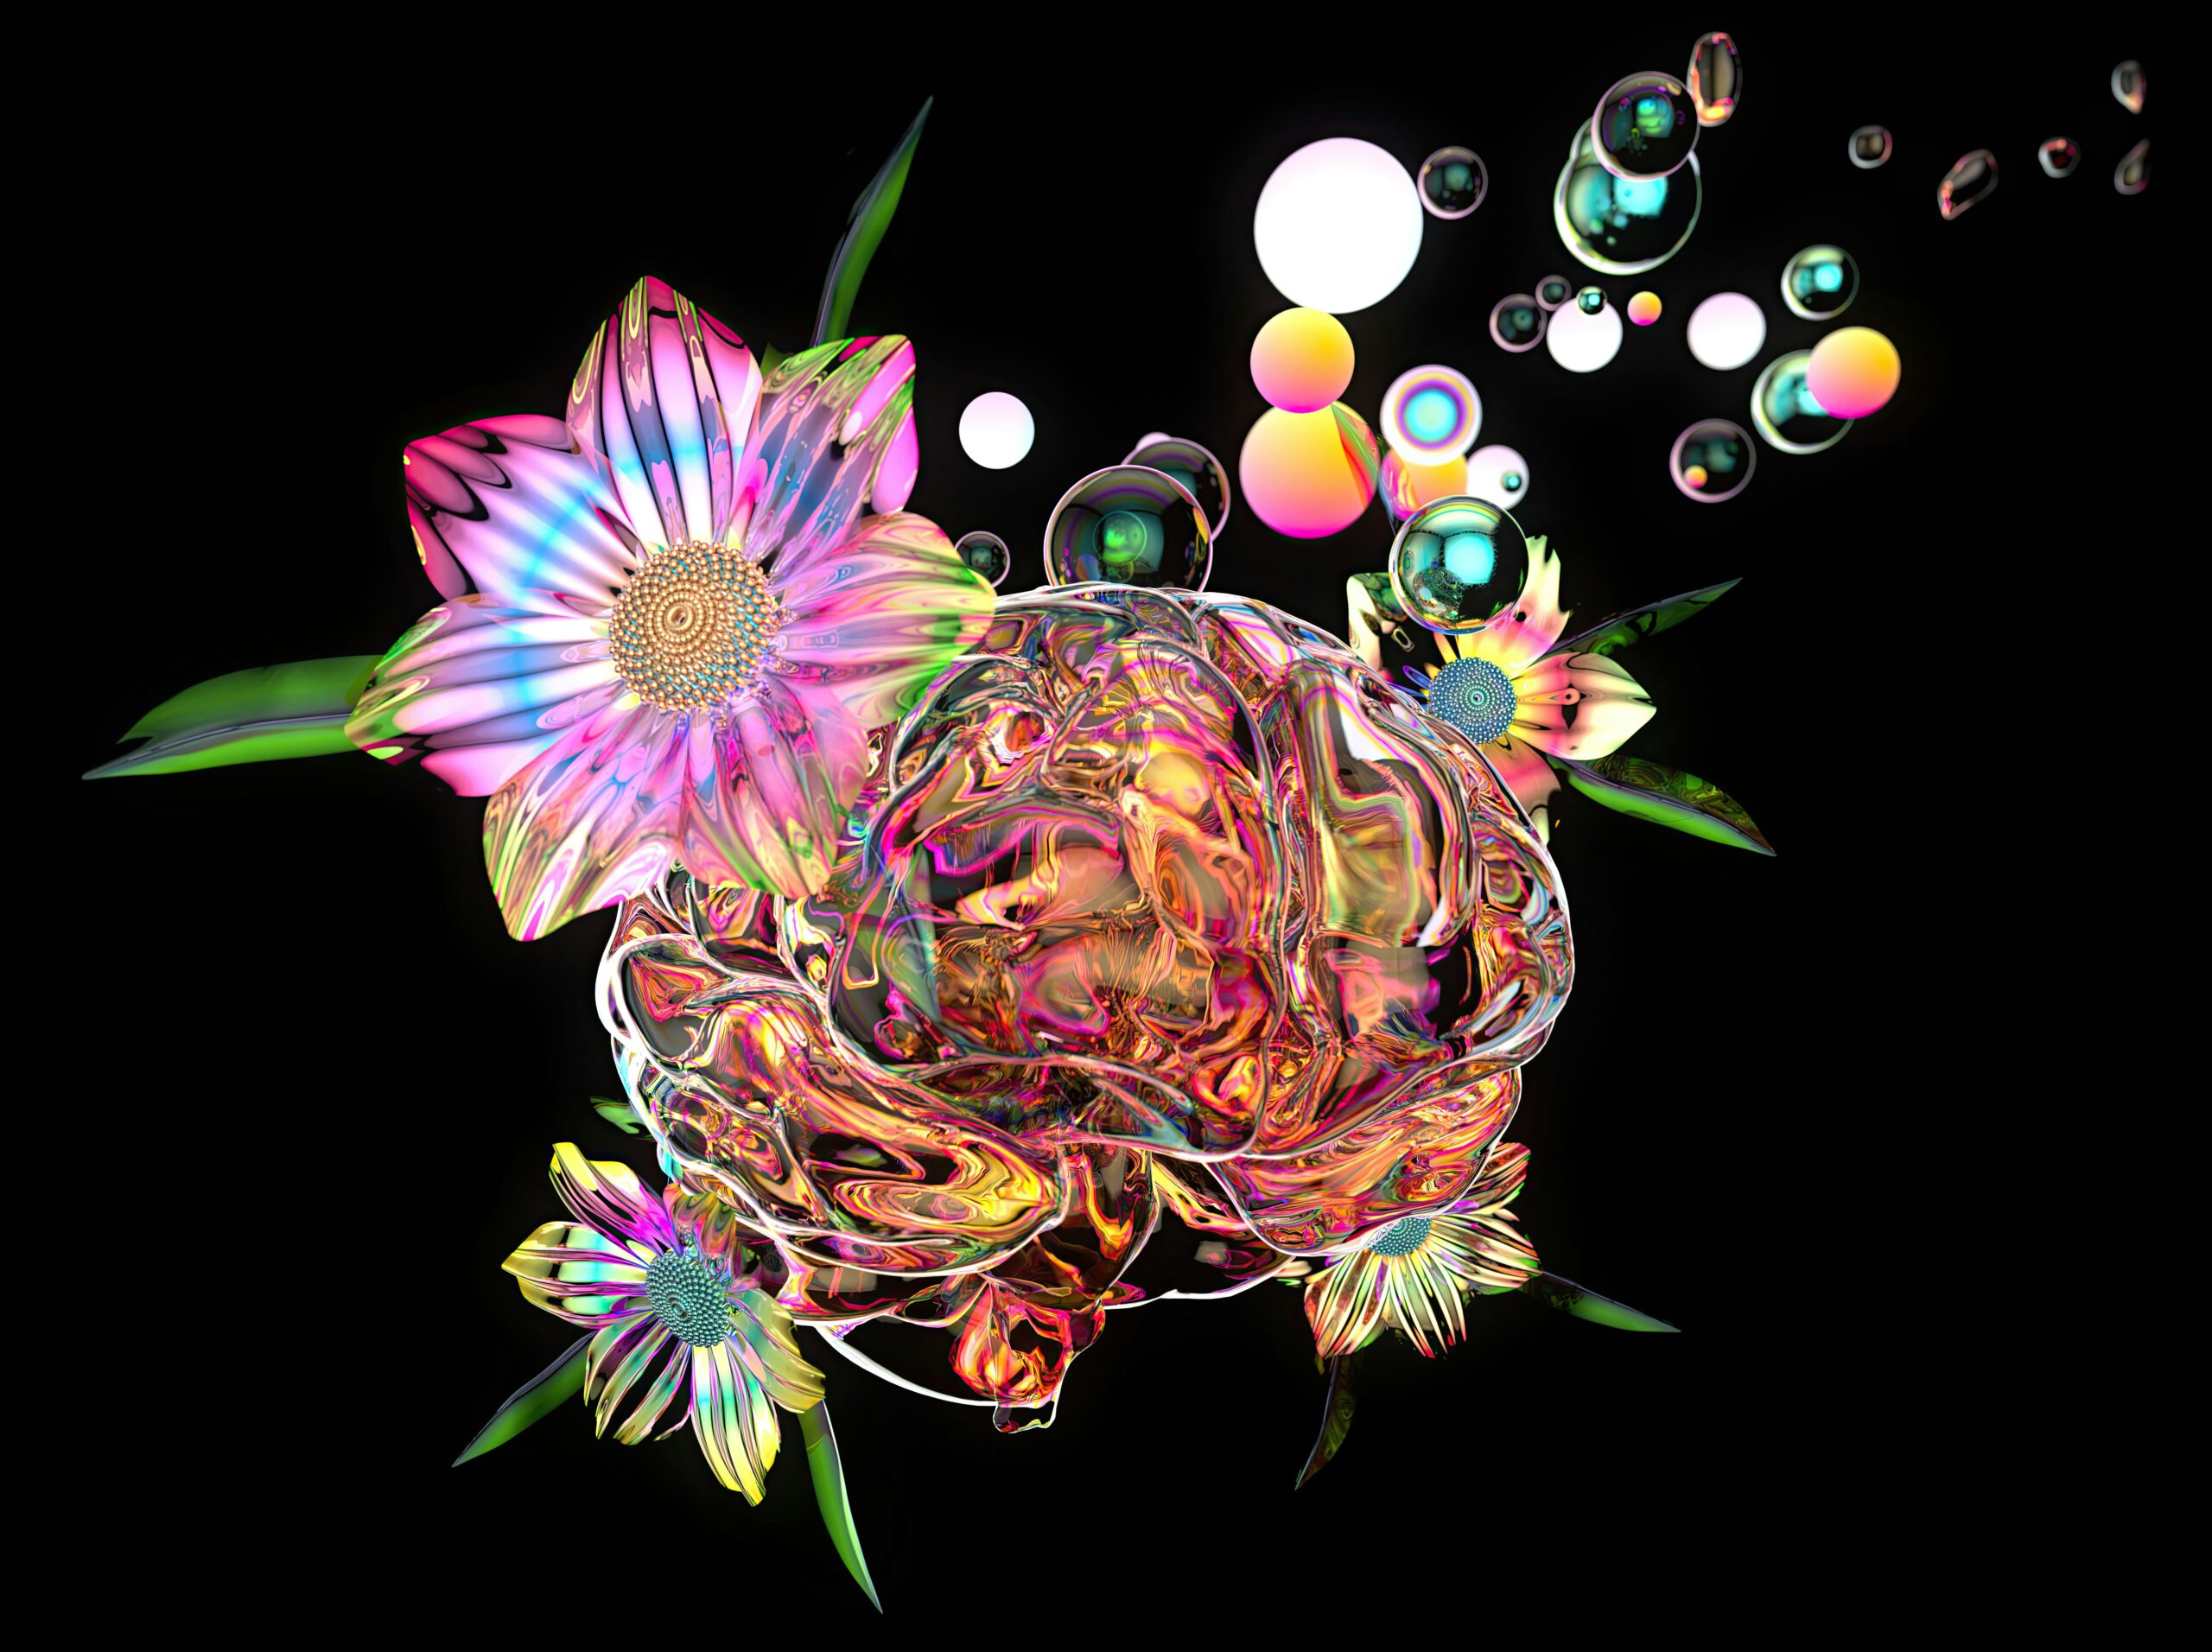 A colorful, AI drawing of a brain surrounded by brightly colored flowers and bubbles.